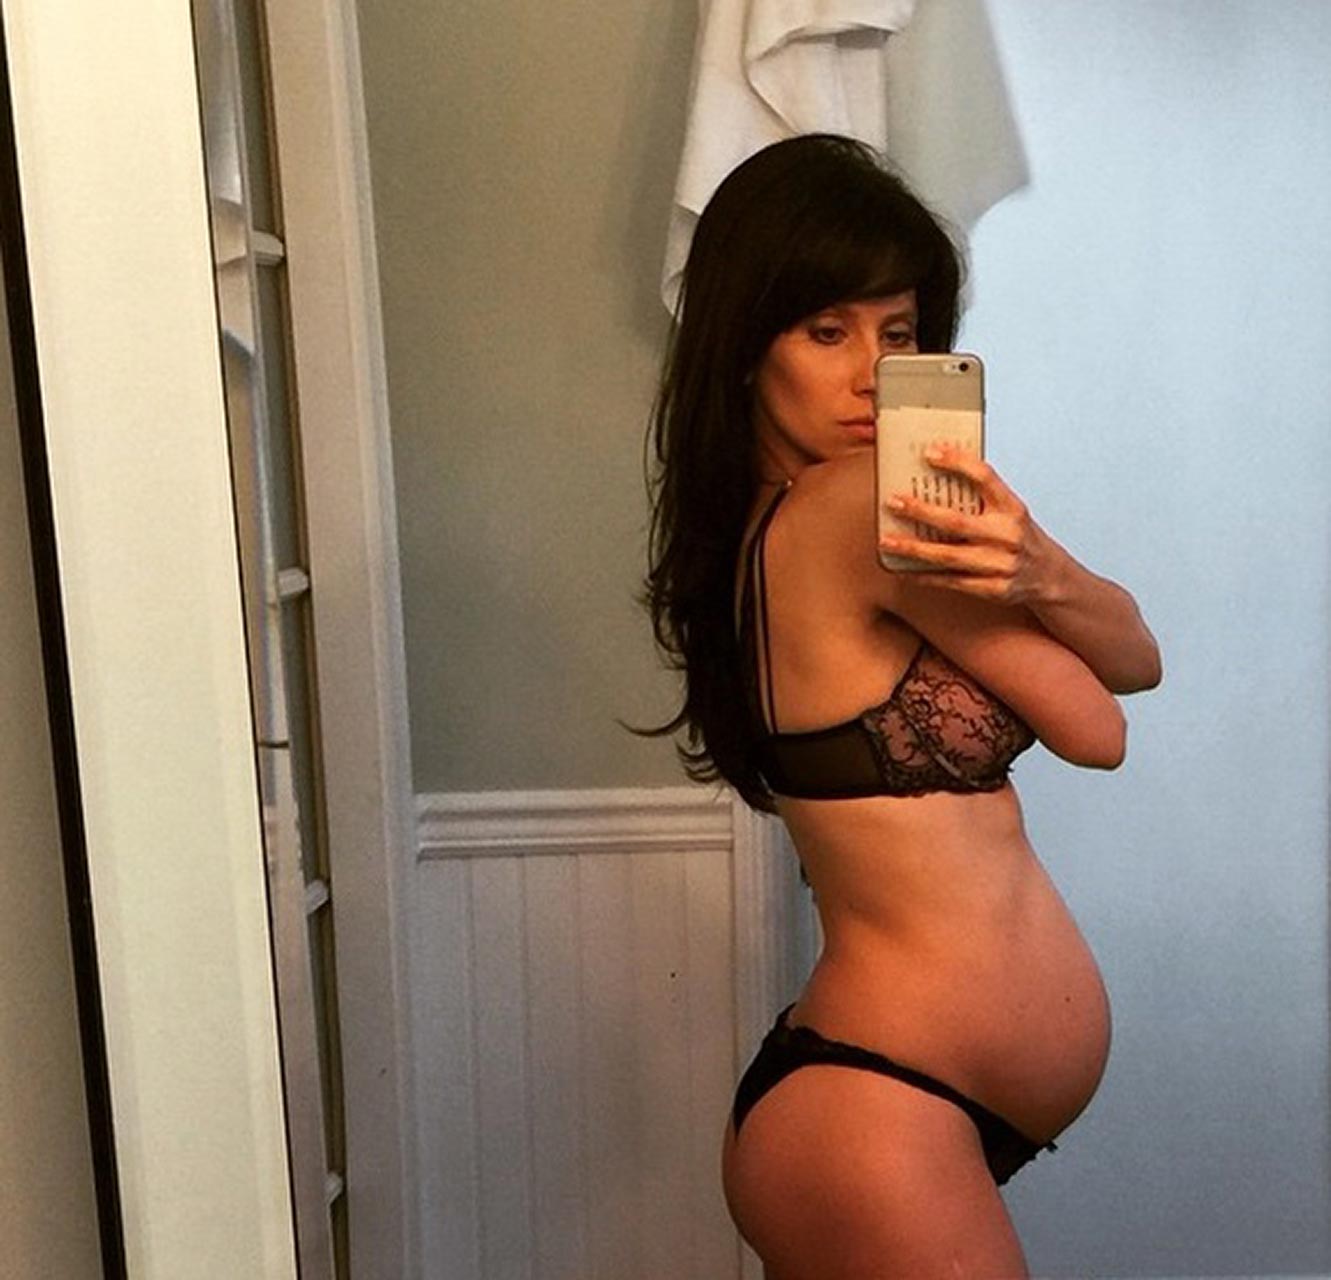 Hilaria Baldwin from Instagram and other half naked baby bump pics, where u...